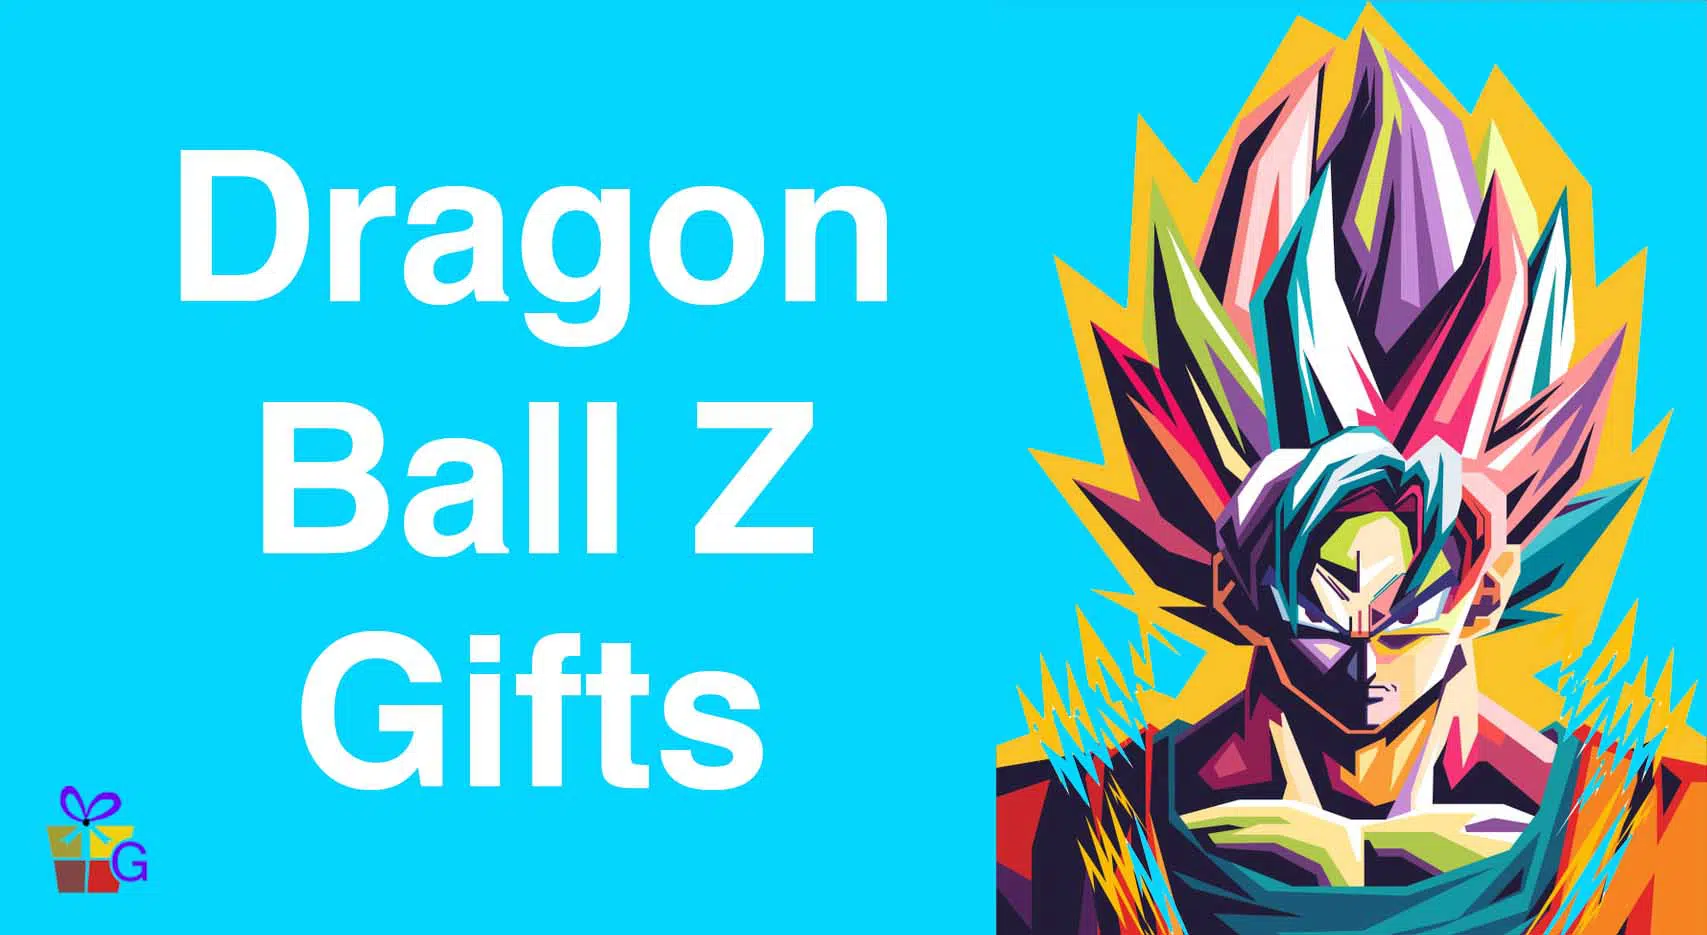 Gifts for Dragon Ball Z fans